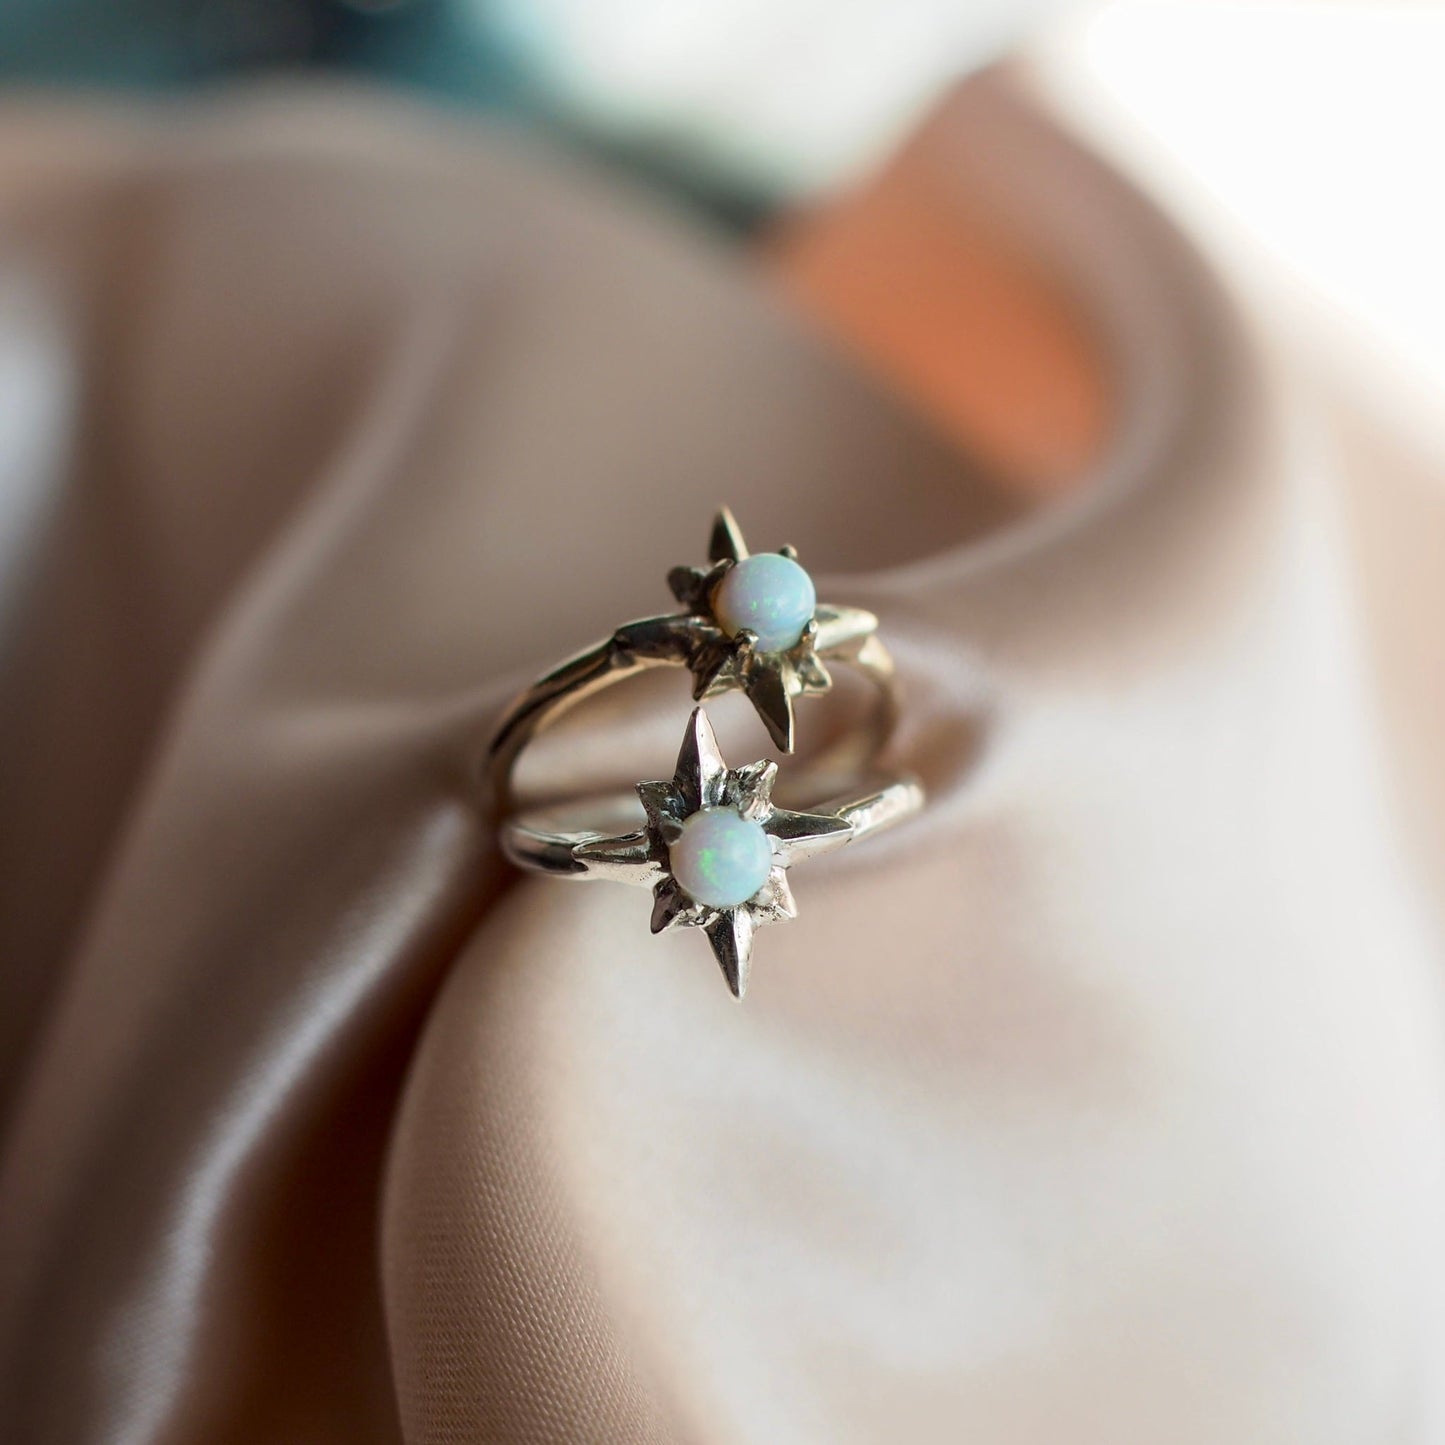 Polaris north star ring set with a tiny lab grown opal in sterling silver and gold tone bronze handmade by Iron Oxide Designs